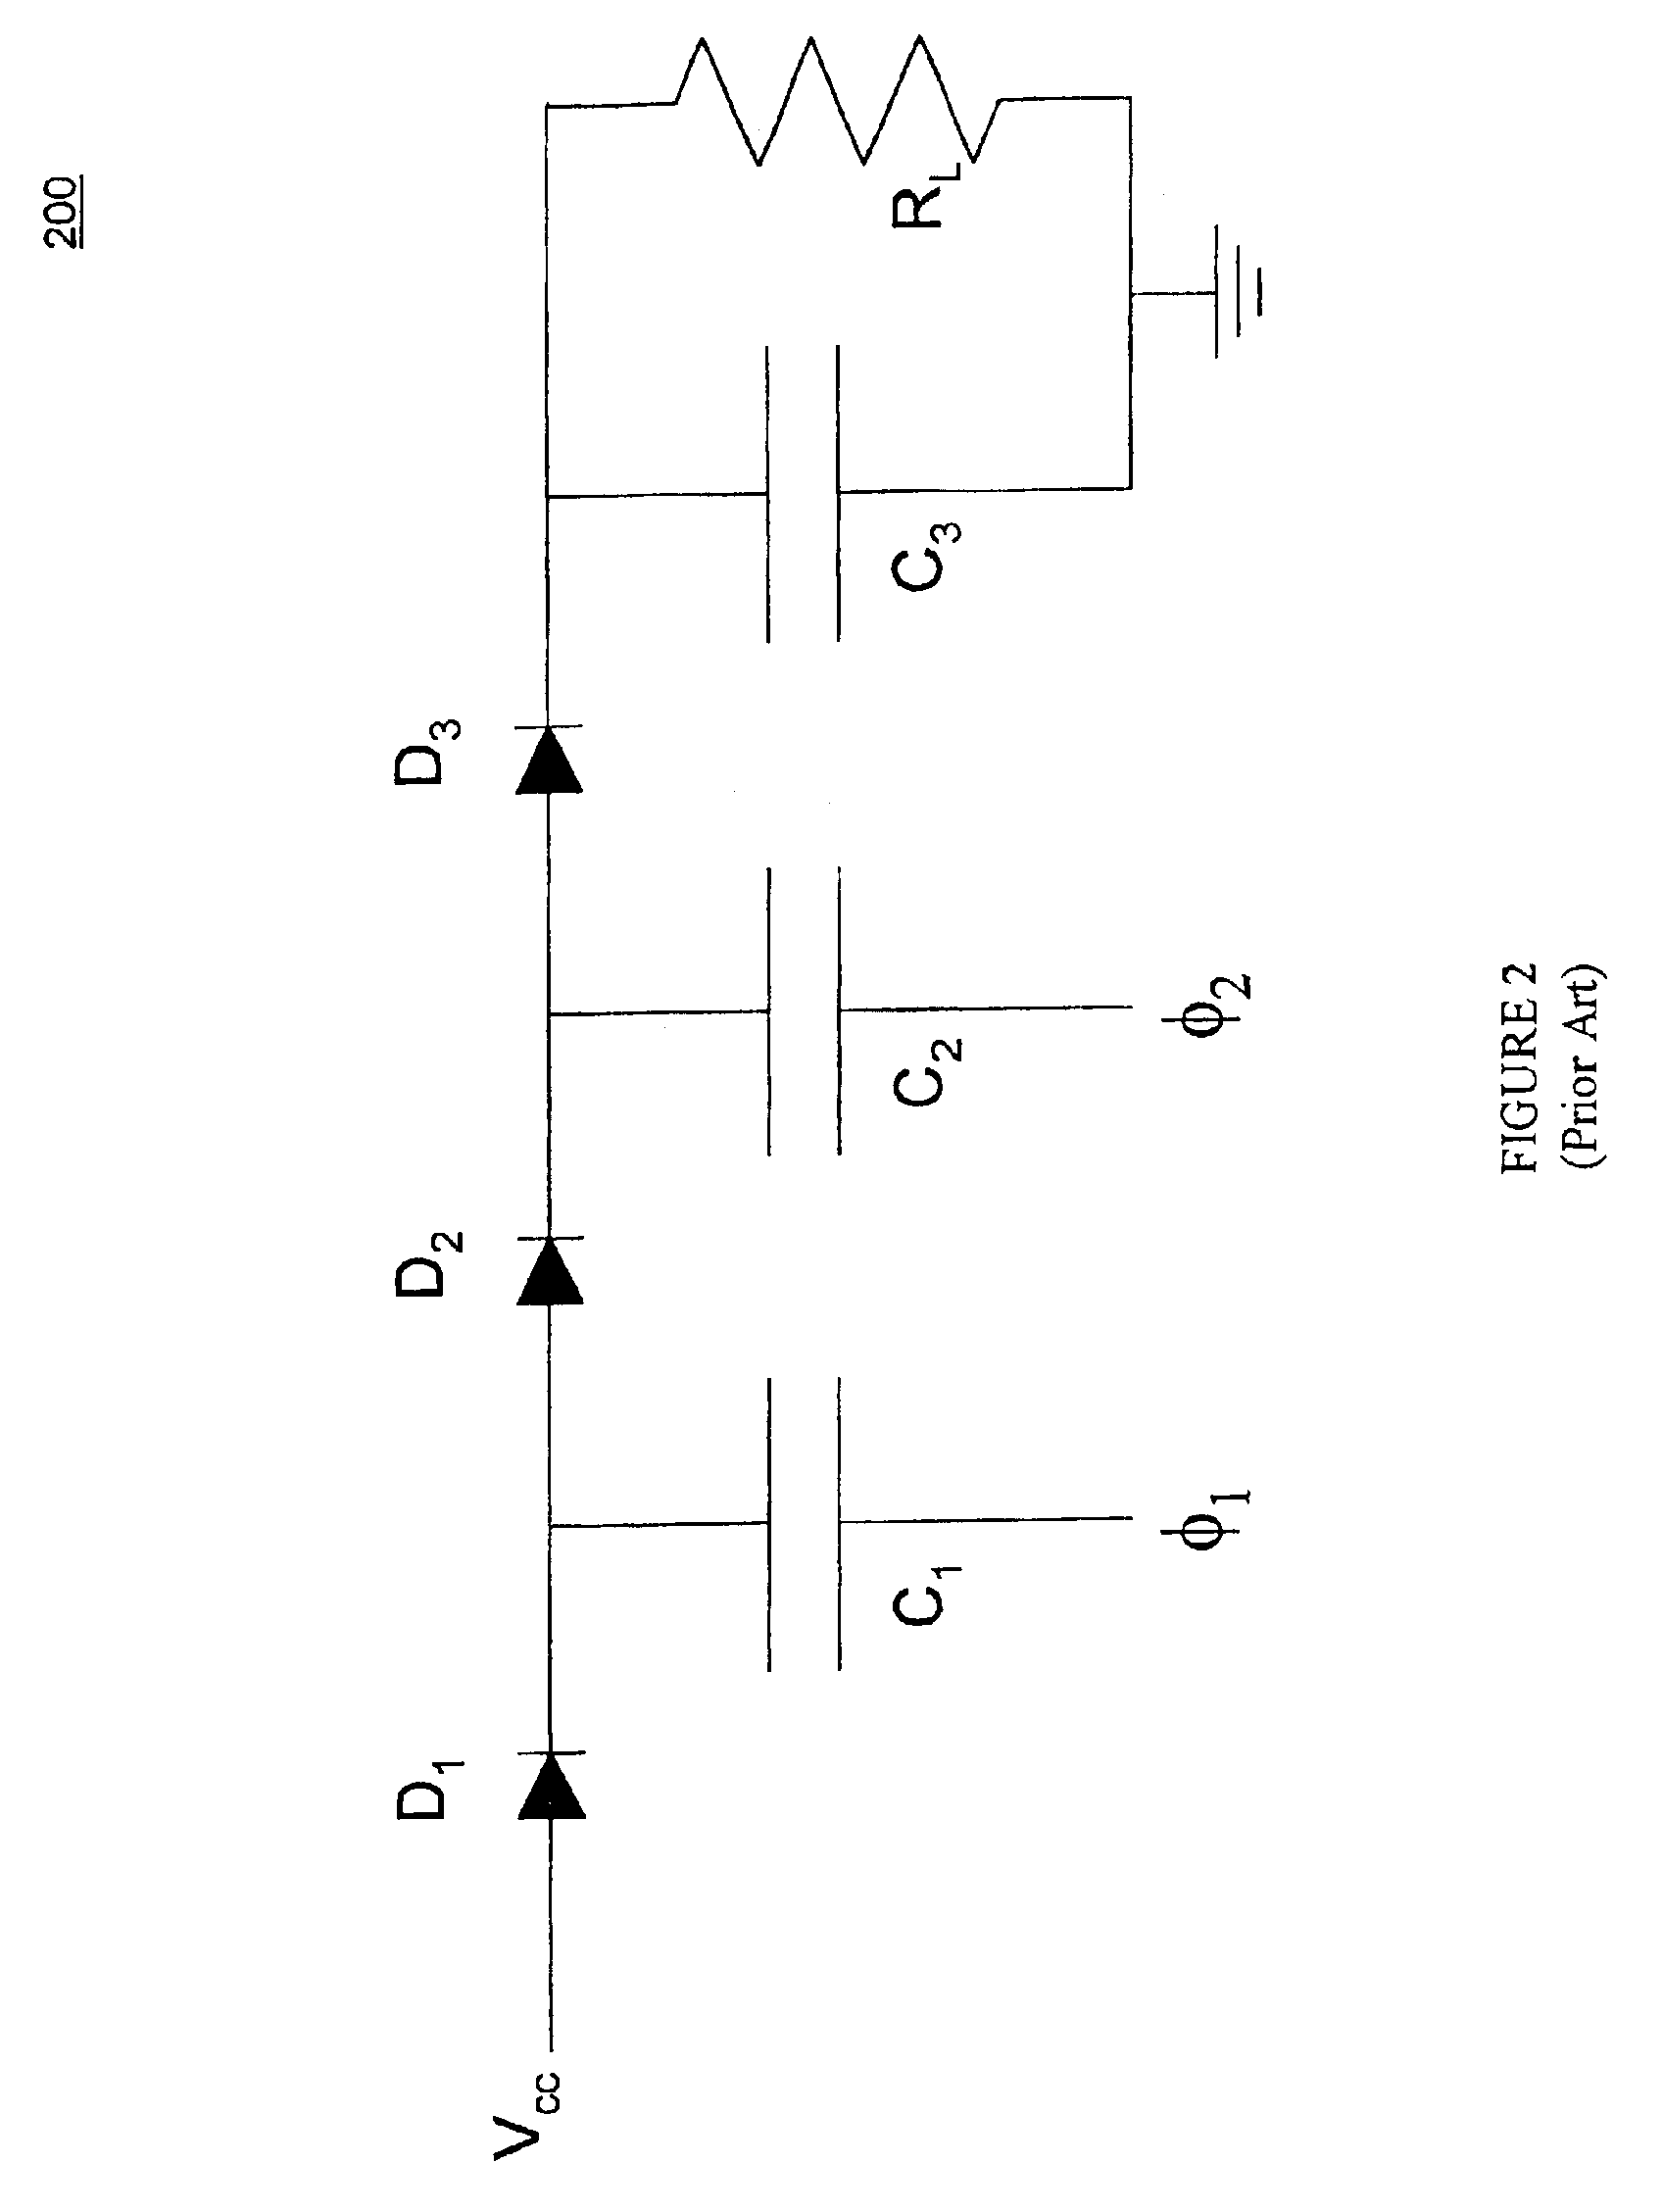 Compensated oscillator circuit for charge pumps